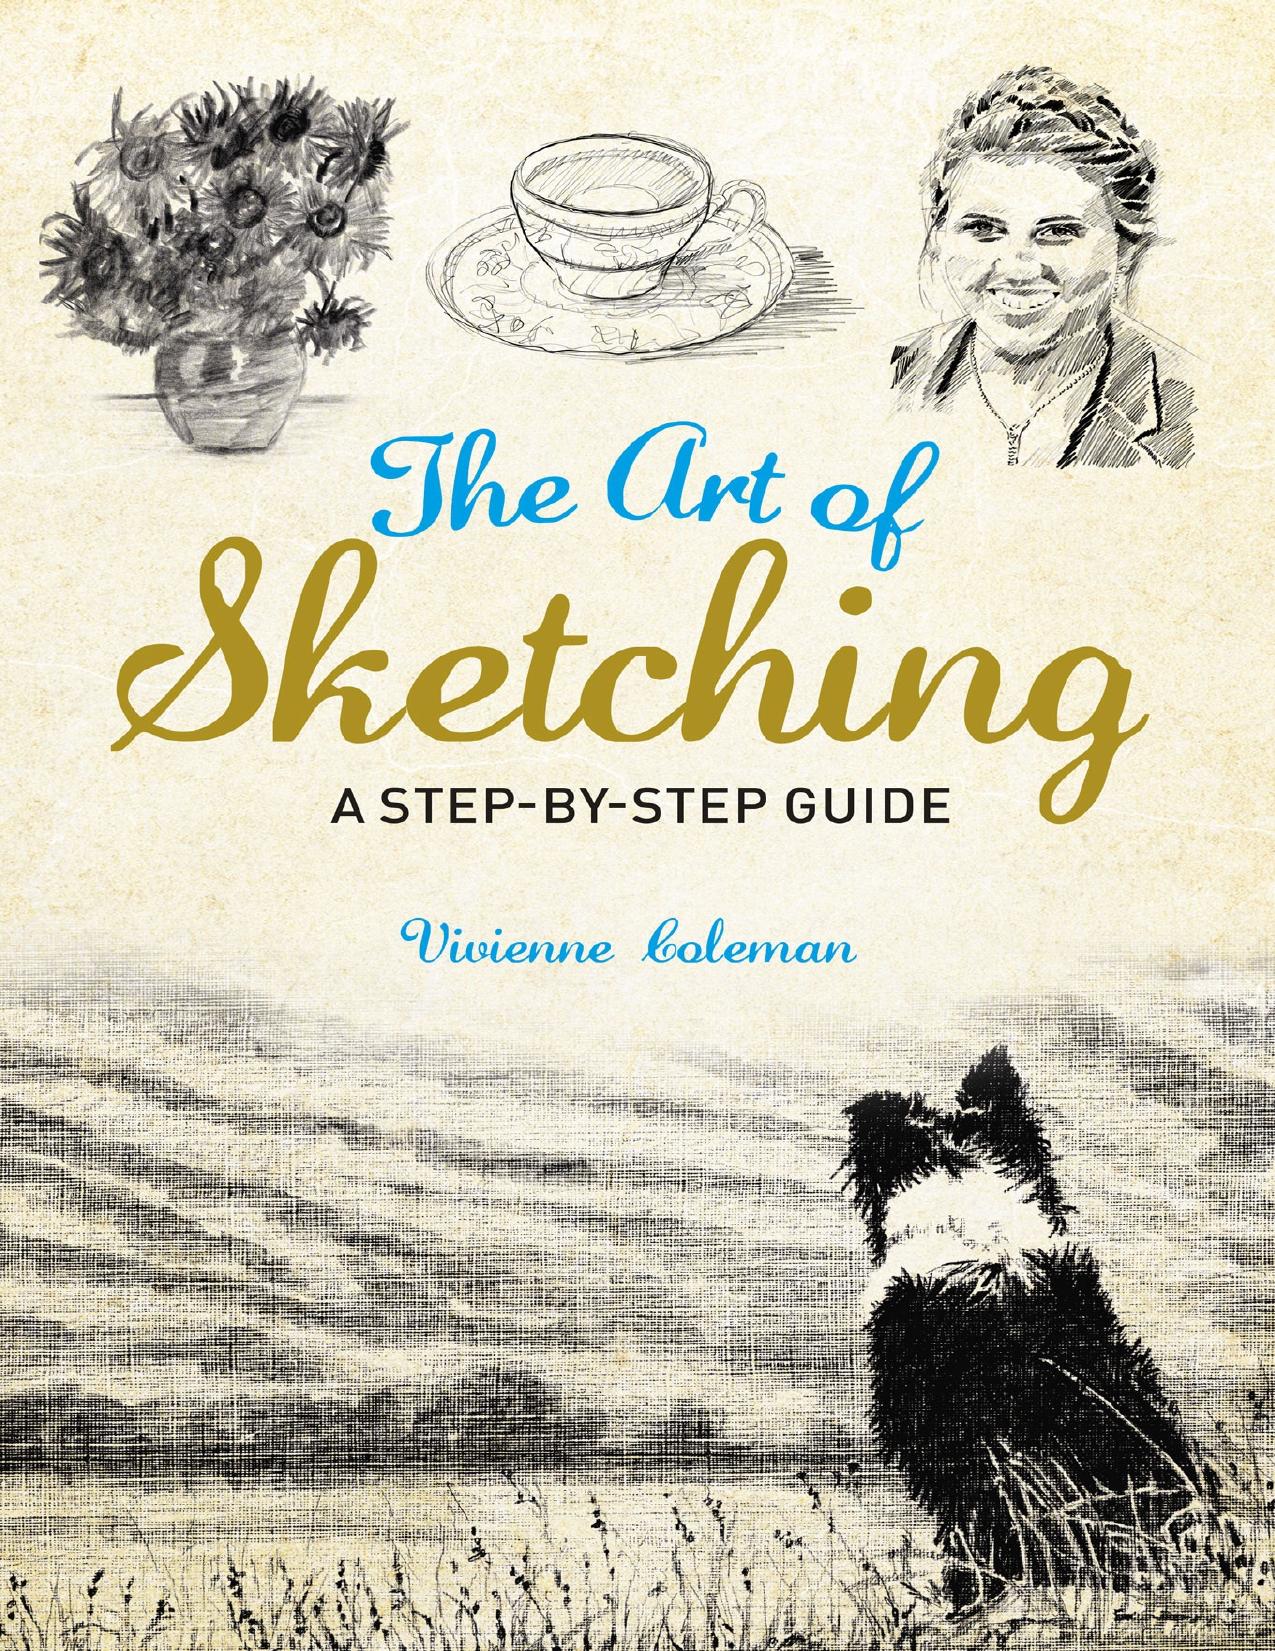 The Art of Sketching: A Step-by-Step Guide - PDFDrive.com